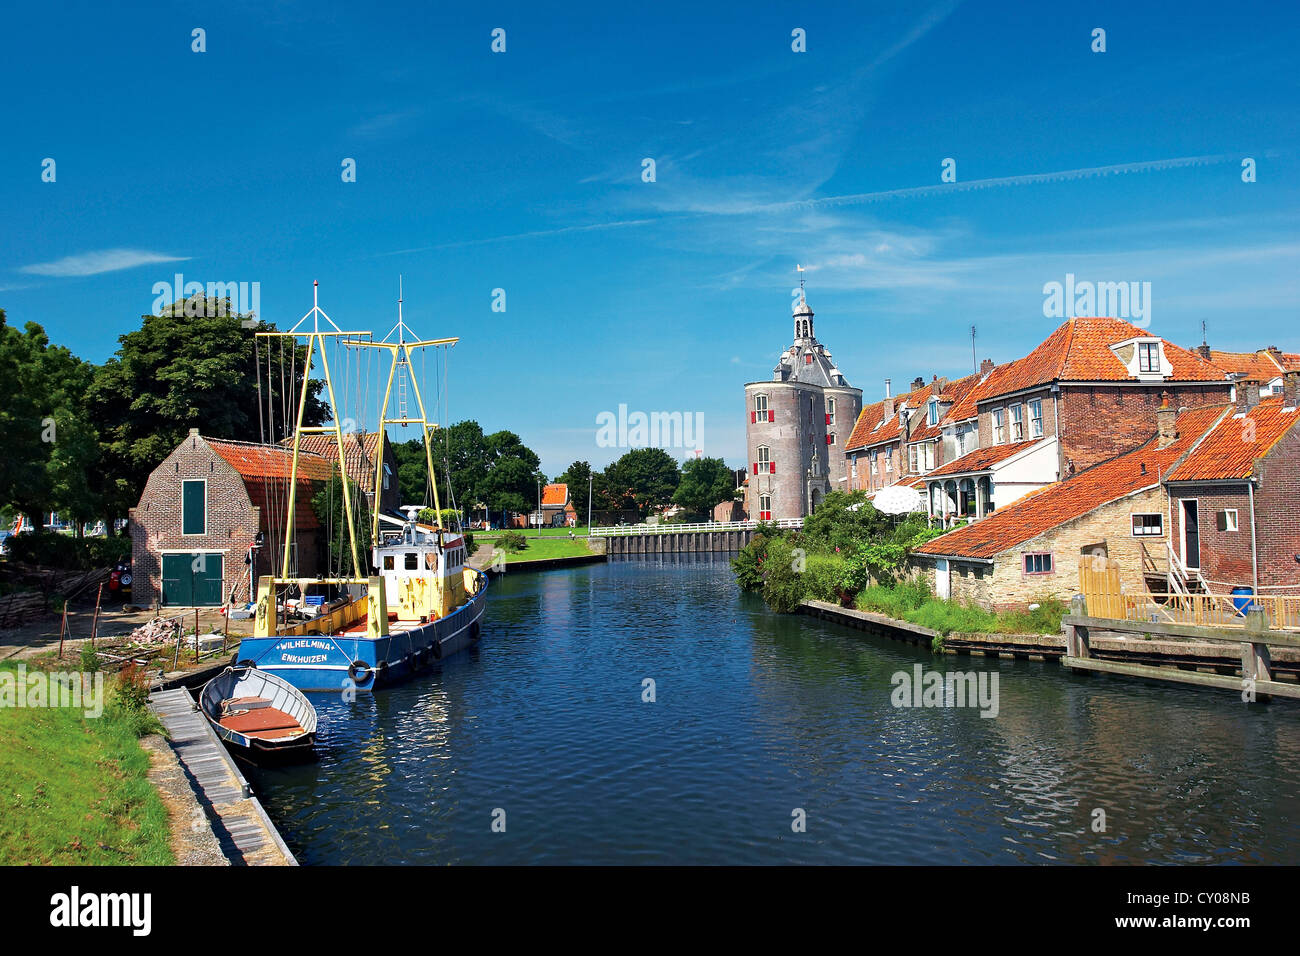 Netherlands, Enkhuizen, Classic Dutch vessels in the canal, Drommedaris Tower in the background. Stock Photo